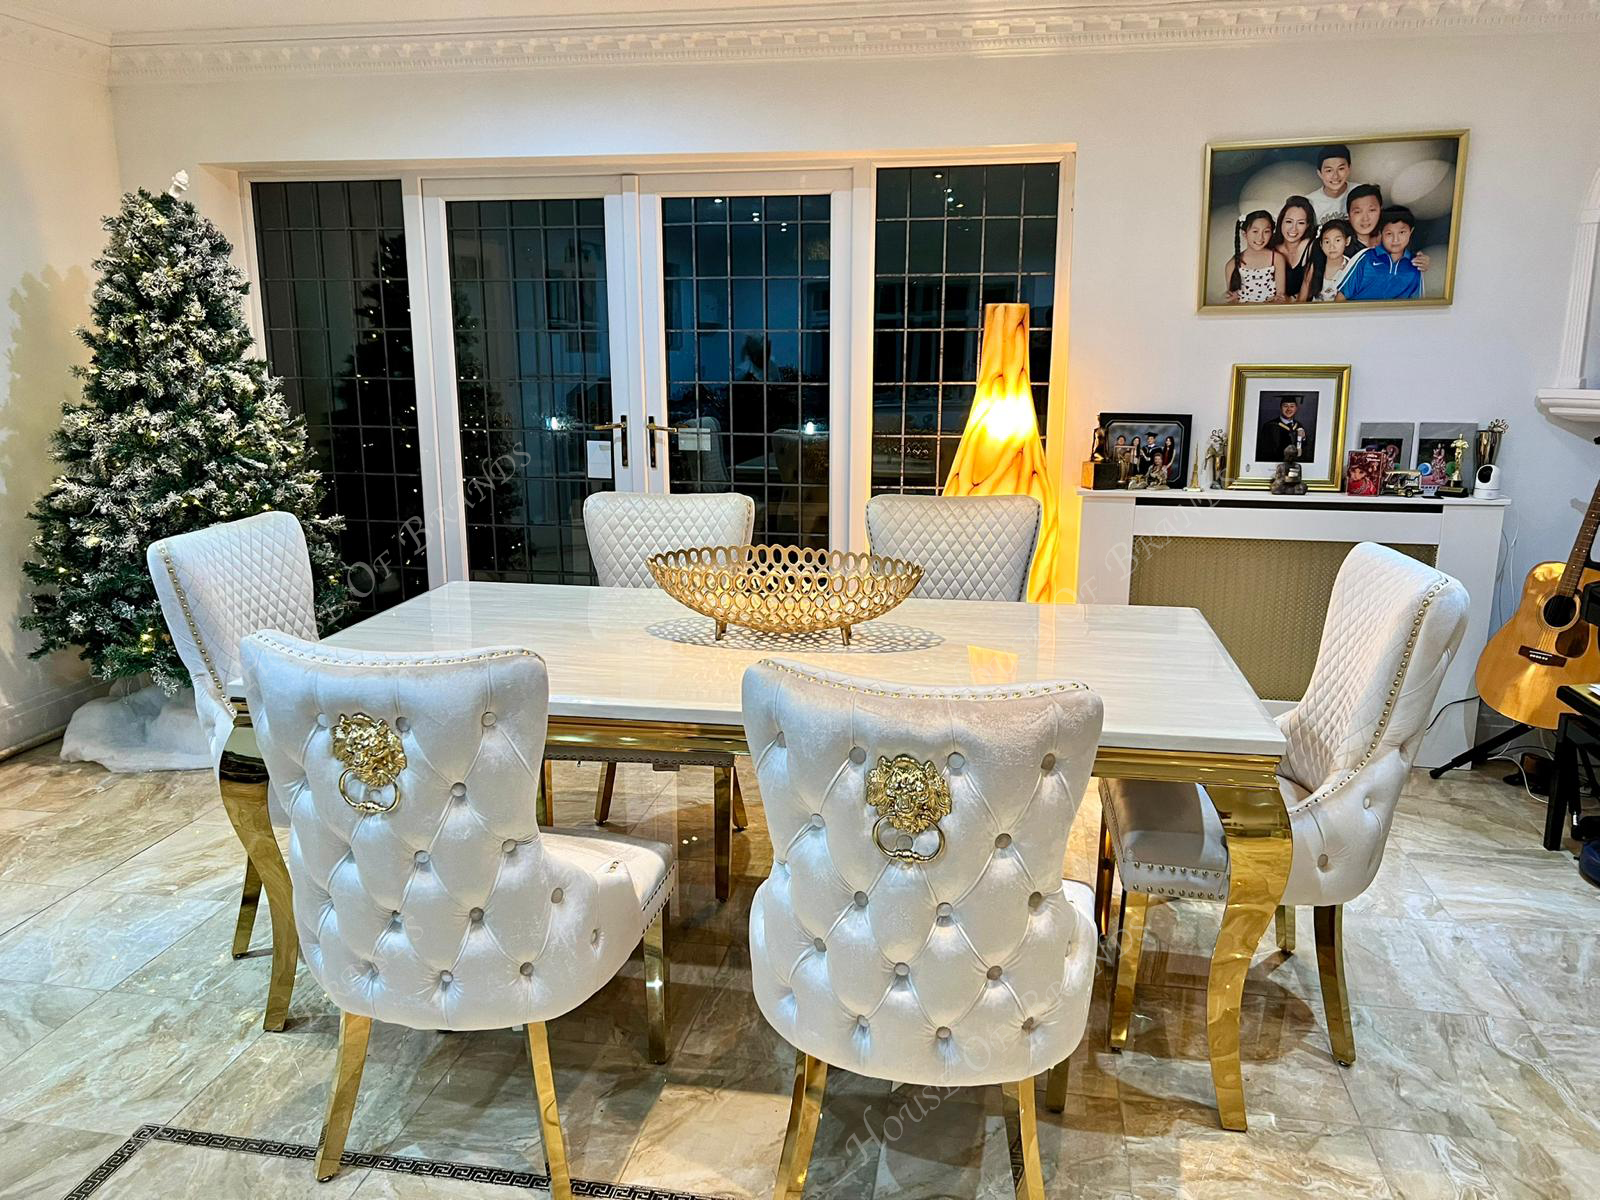 200cm Cream and Gold Marble Louis Dining Table with 8 Cream and Gold Victoria Velvet Chairs